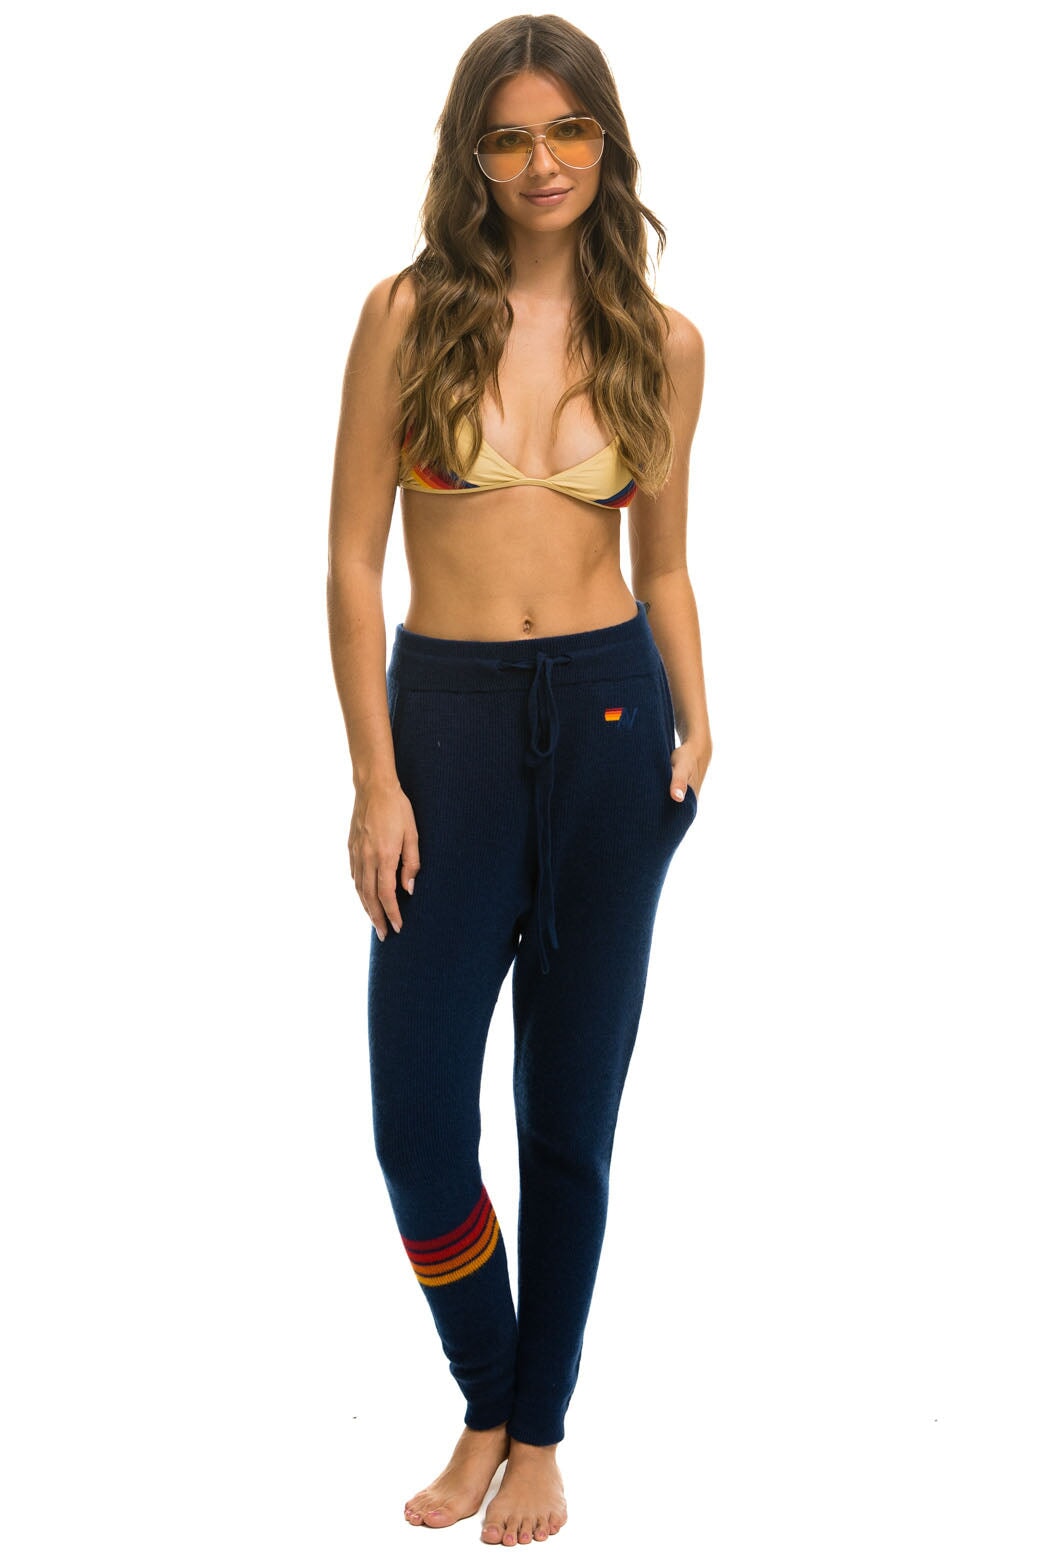 WOMEN'S RAINBOW 4 STRIPE CASHMERE RELAXED FIT PANT - MIDNIGHT Women's Sweatpants Aviator Nation 